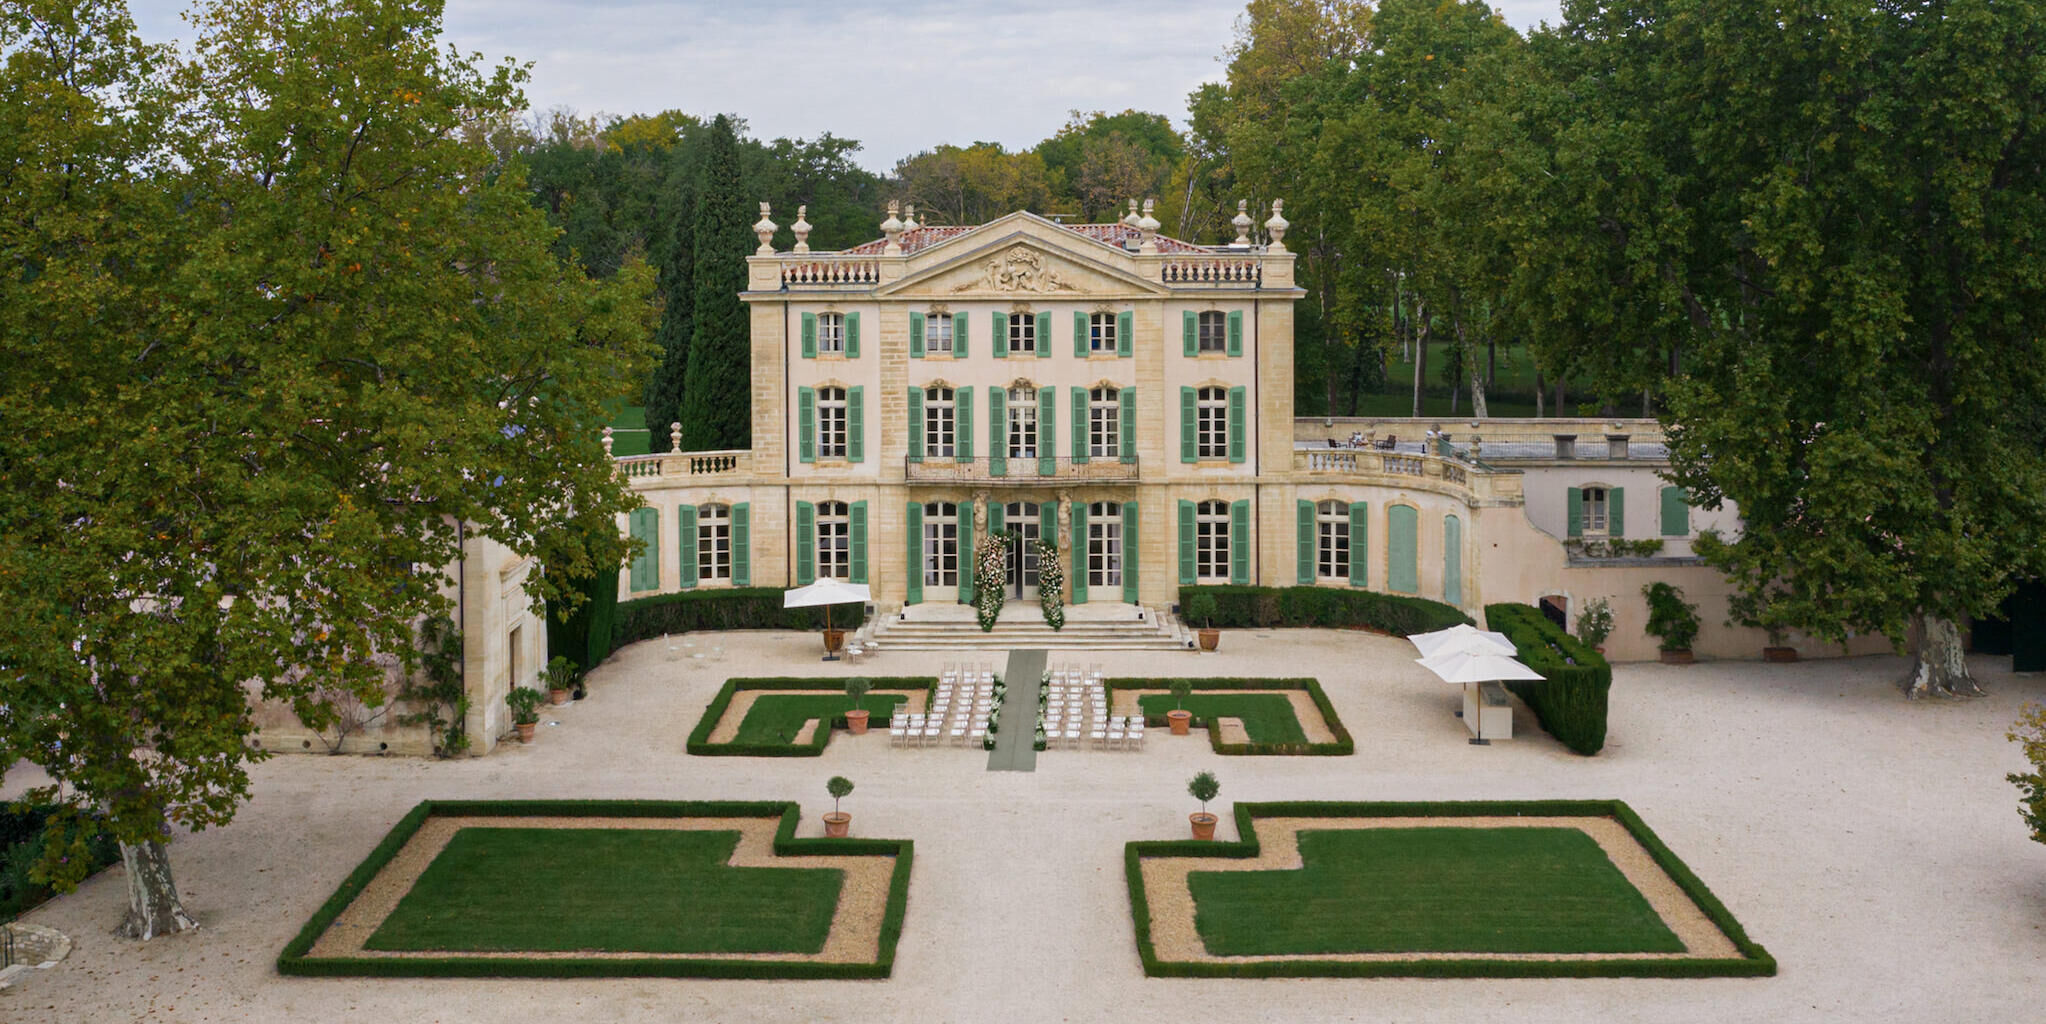 Castle Wedding Venues: A chateau in France surrounded by trees with manicured lawns and green-shuttered windows.